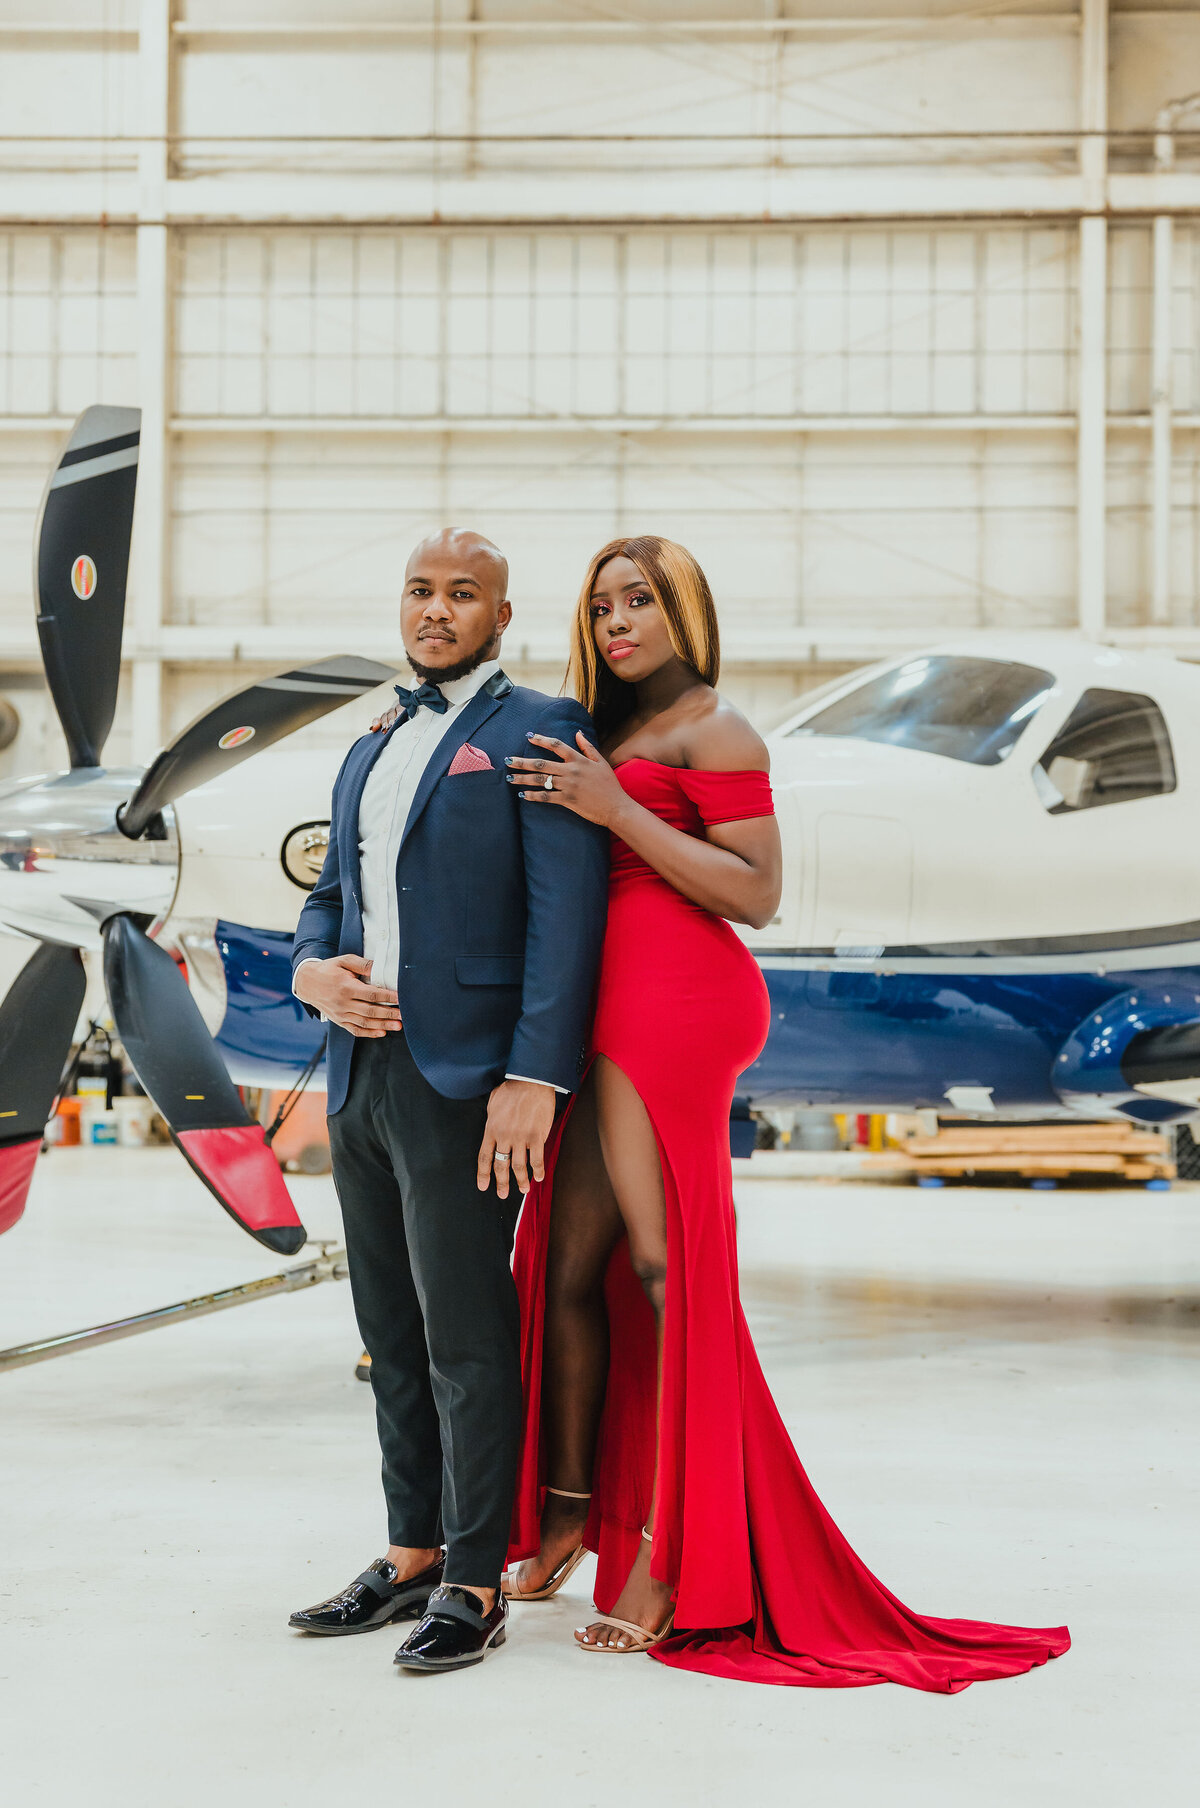 May11,2021_Tosin_Steven_EngagementSession_16-Edit